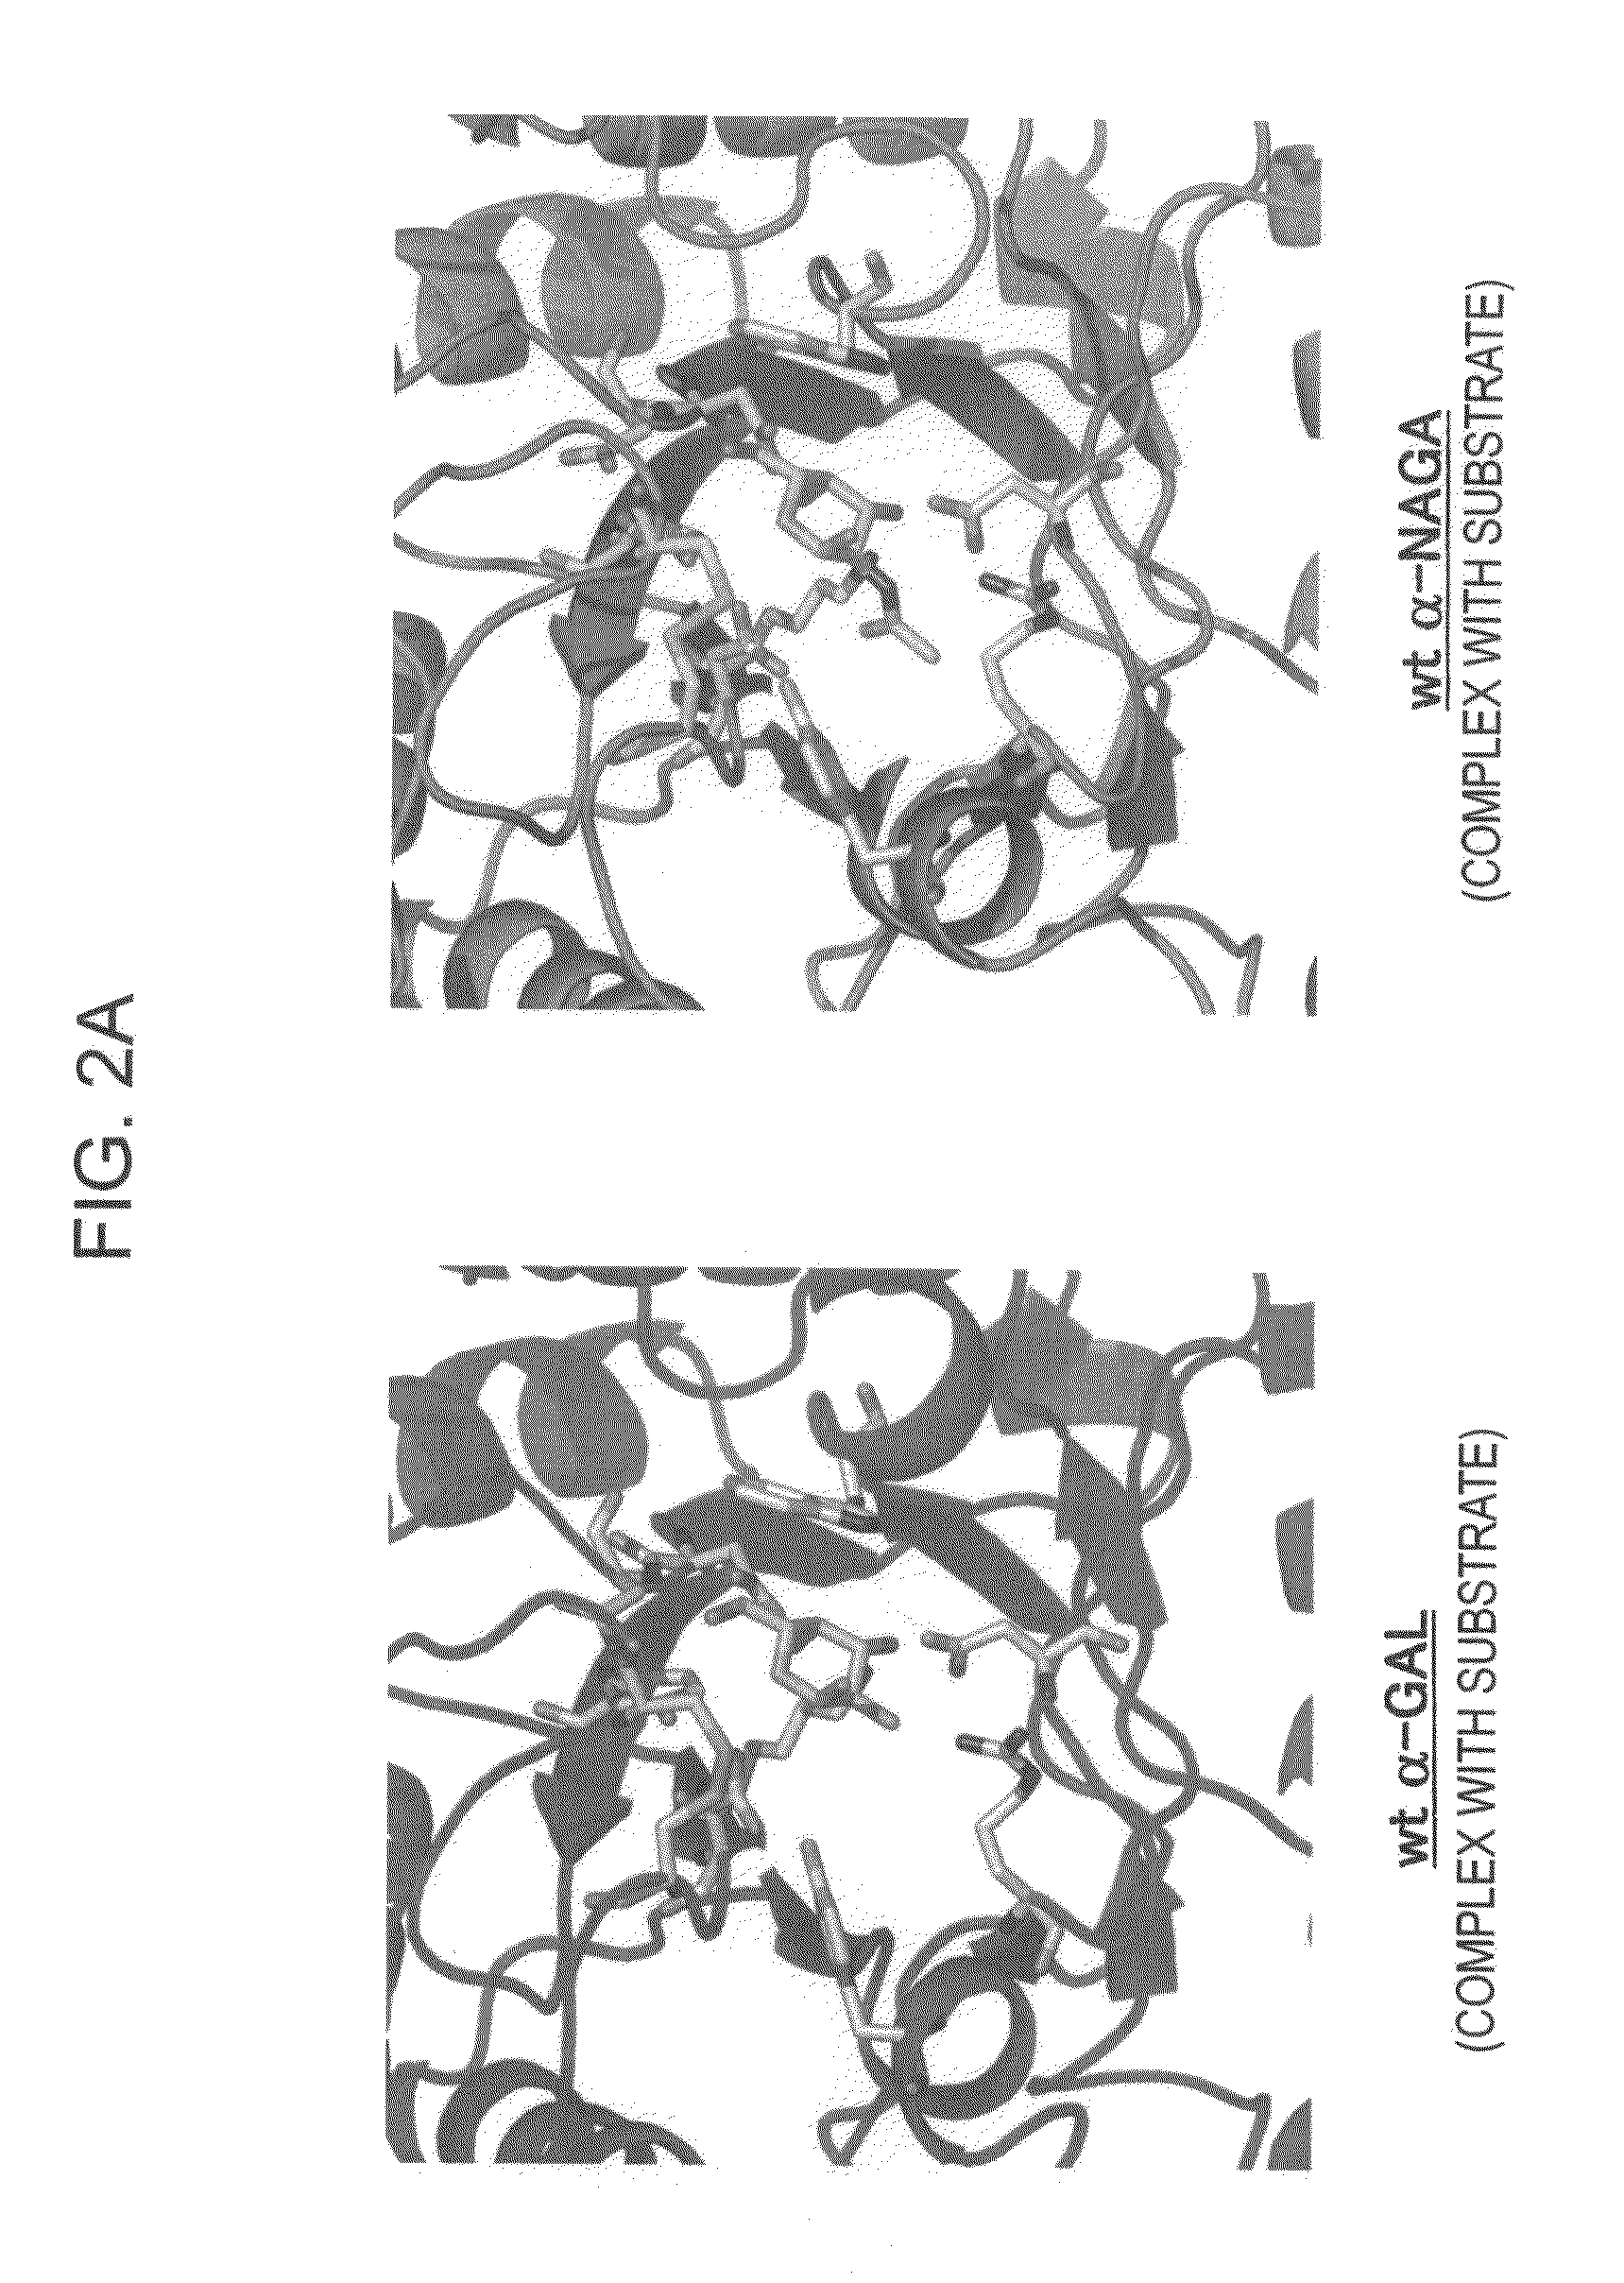 Highly functional enzyme having α-galactosidase activity